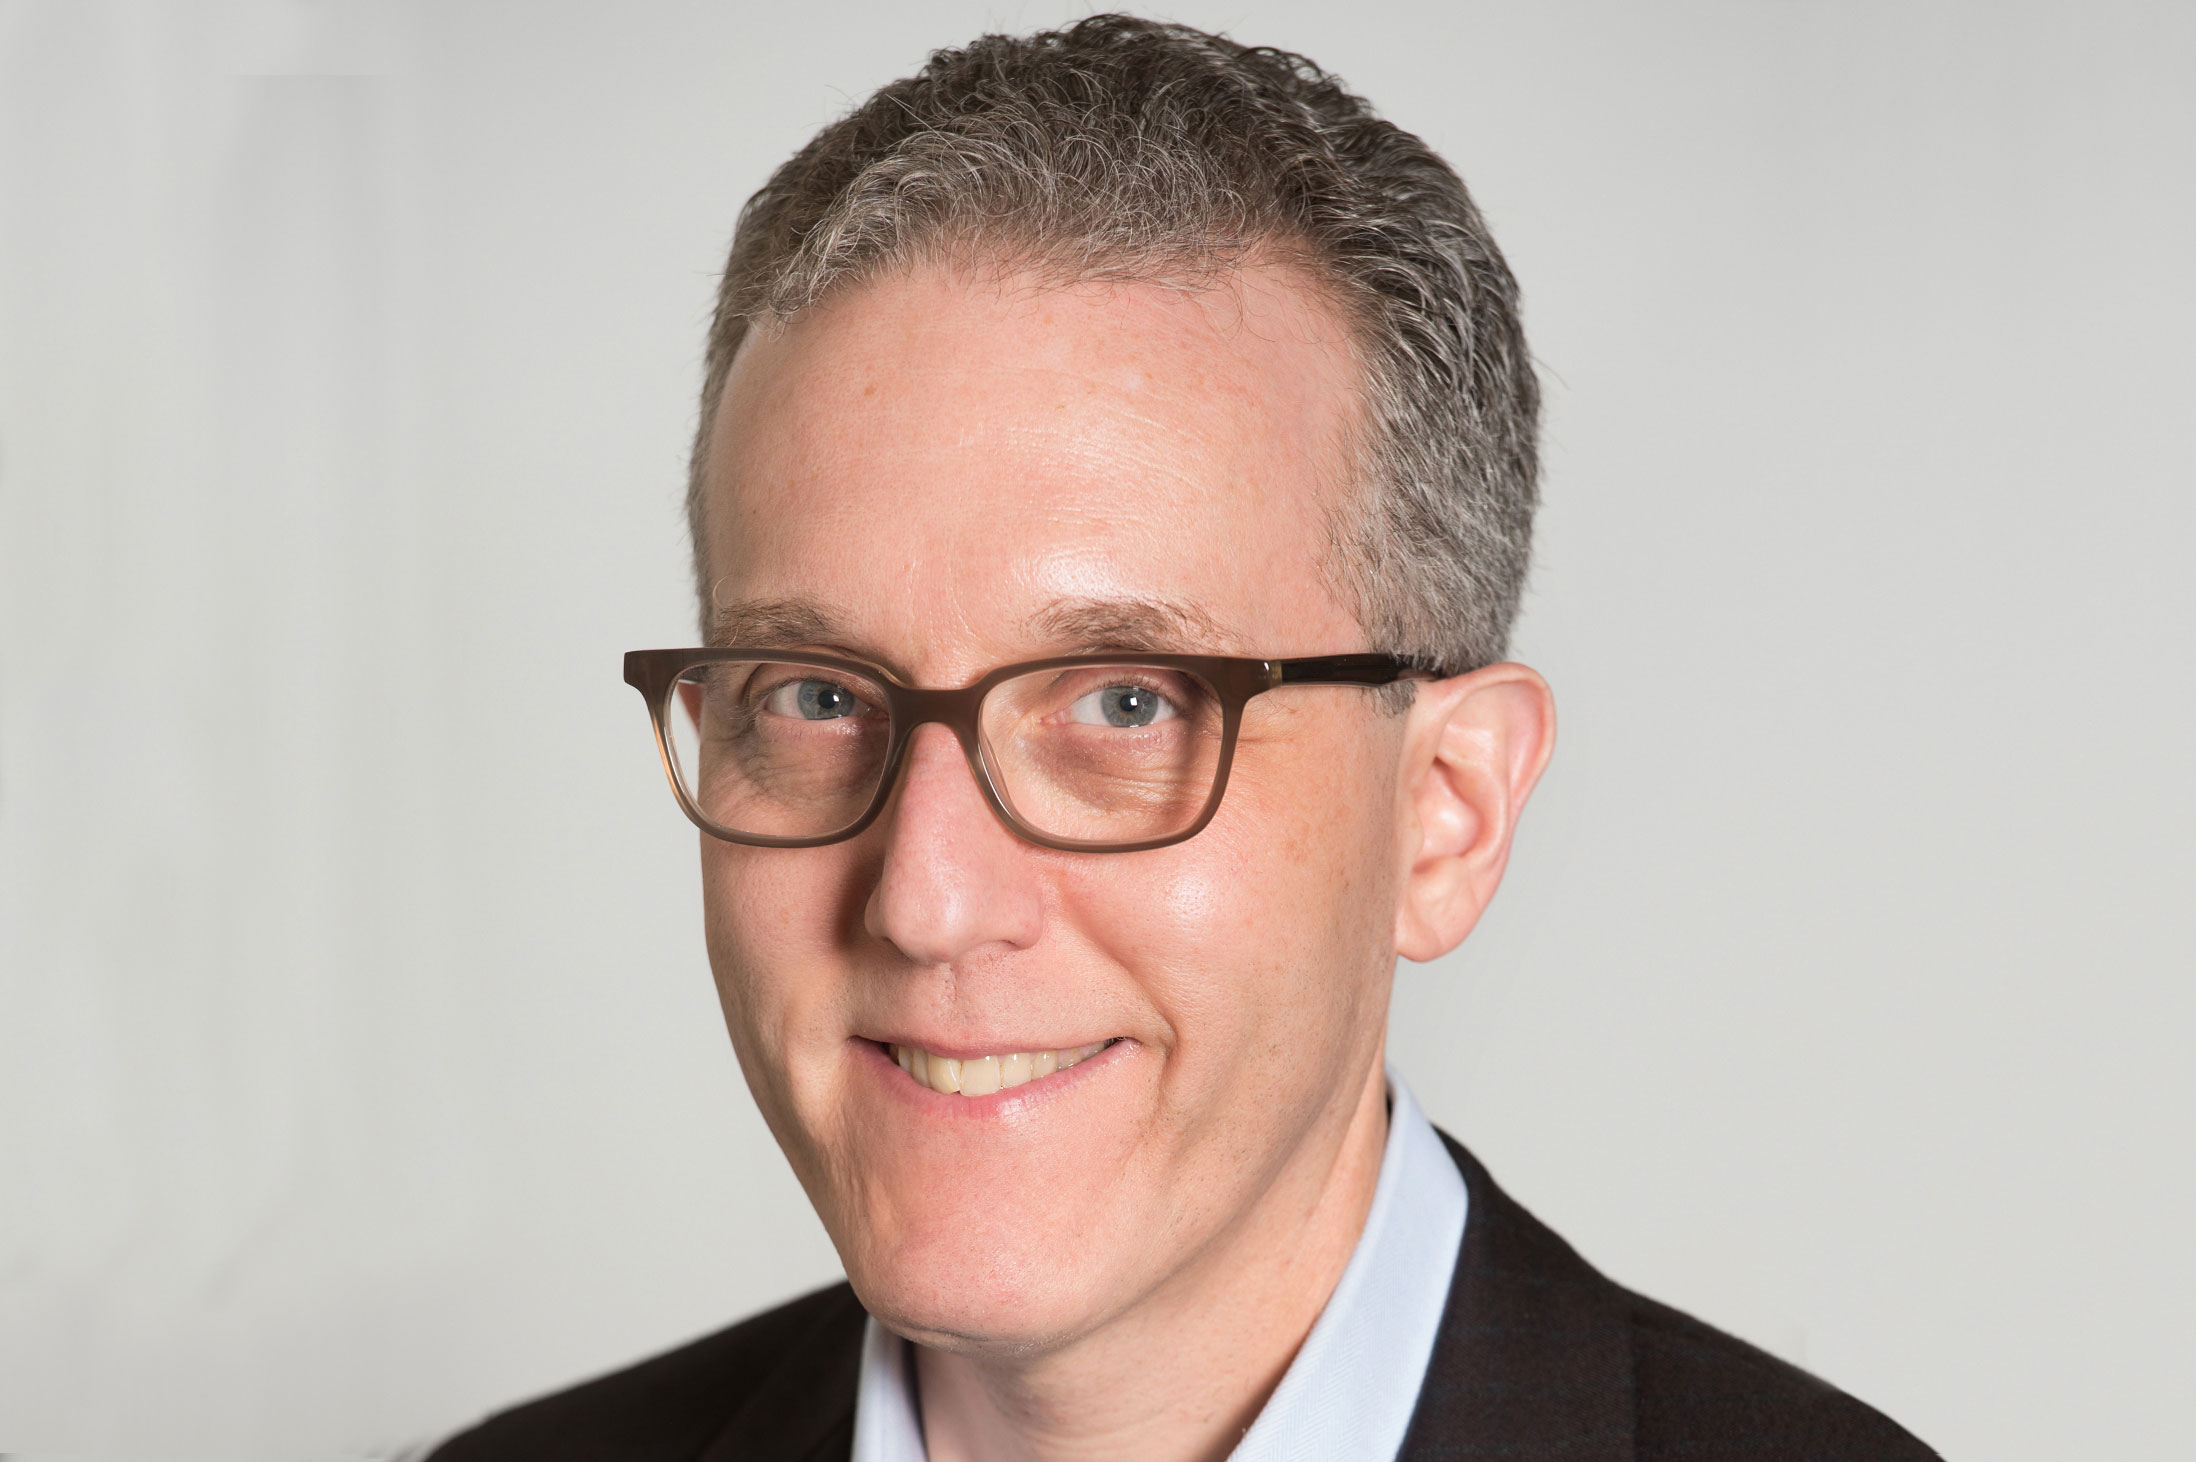 The one hundred honoree: Jedd Wolchok, MD, PhD